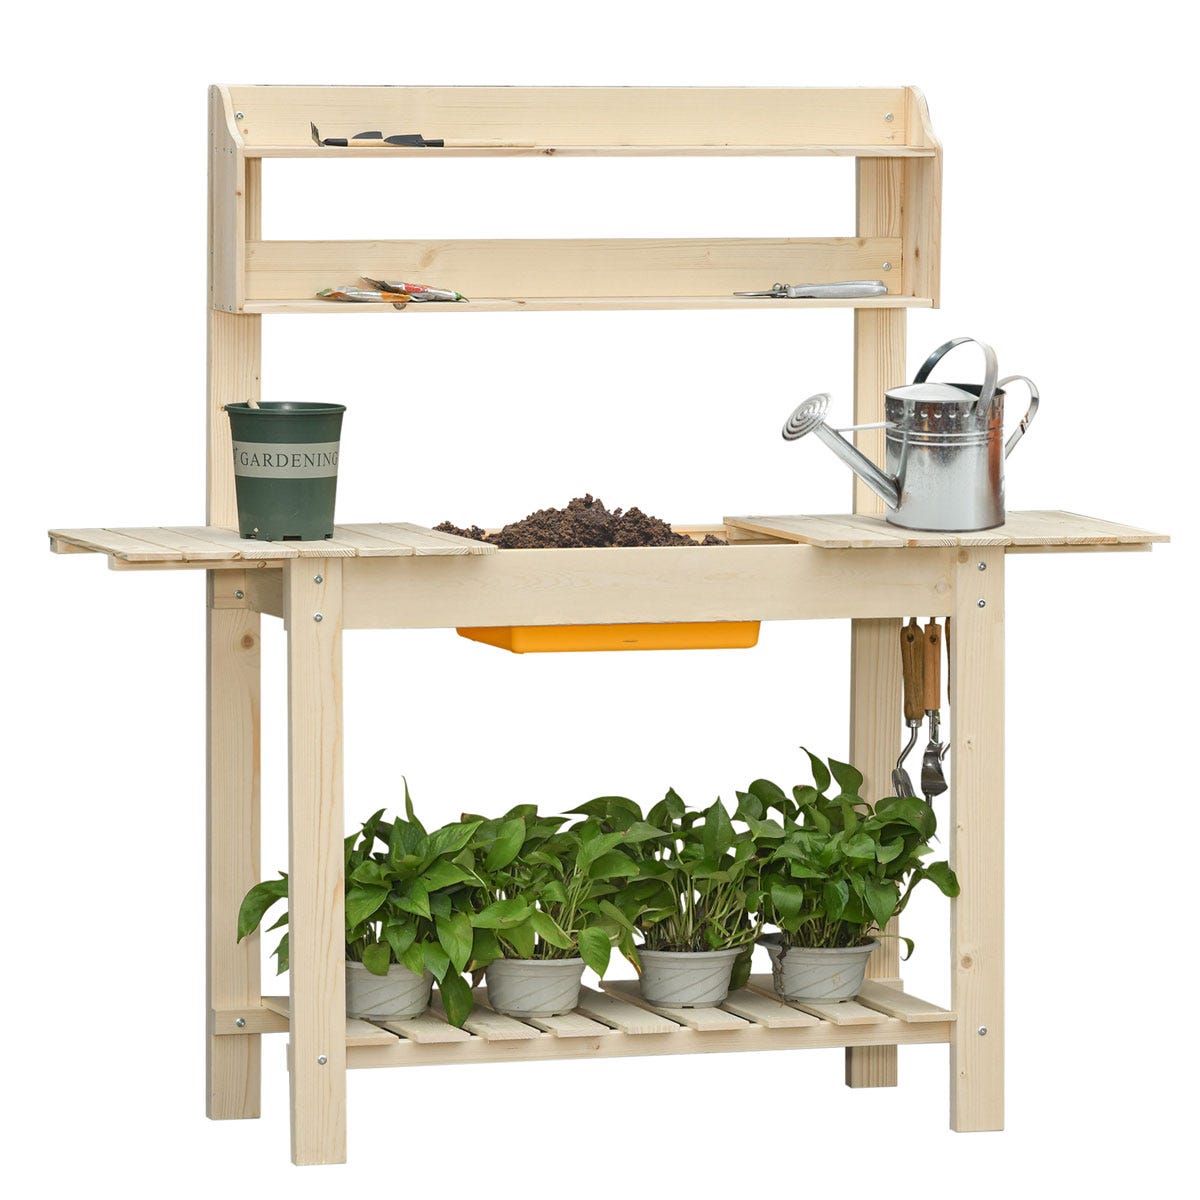 Outsunny Garden Potting Bench Workstation Table w/ Sliding Tabletop and Dry Sink